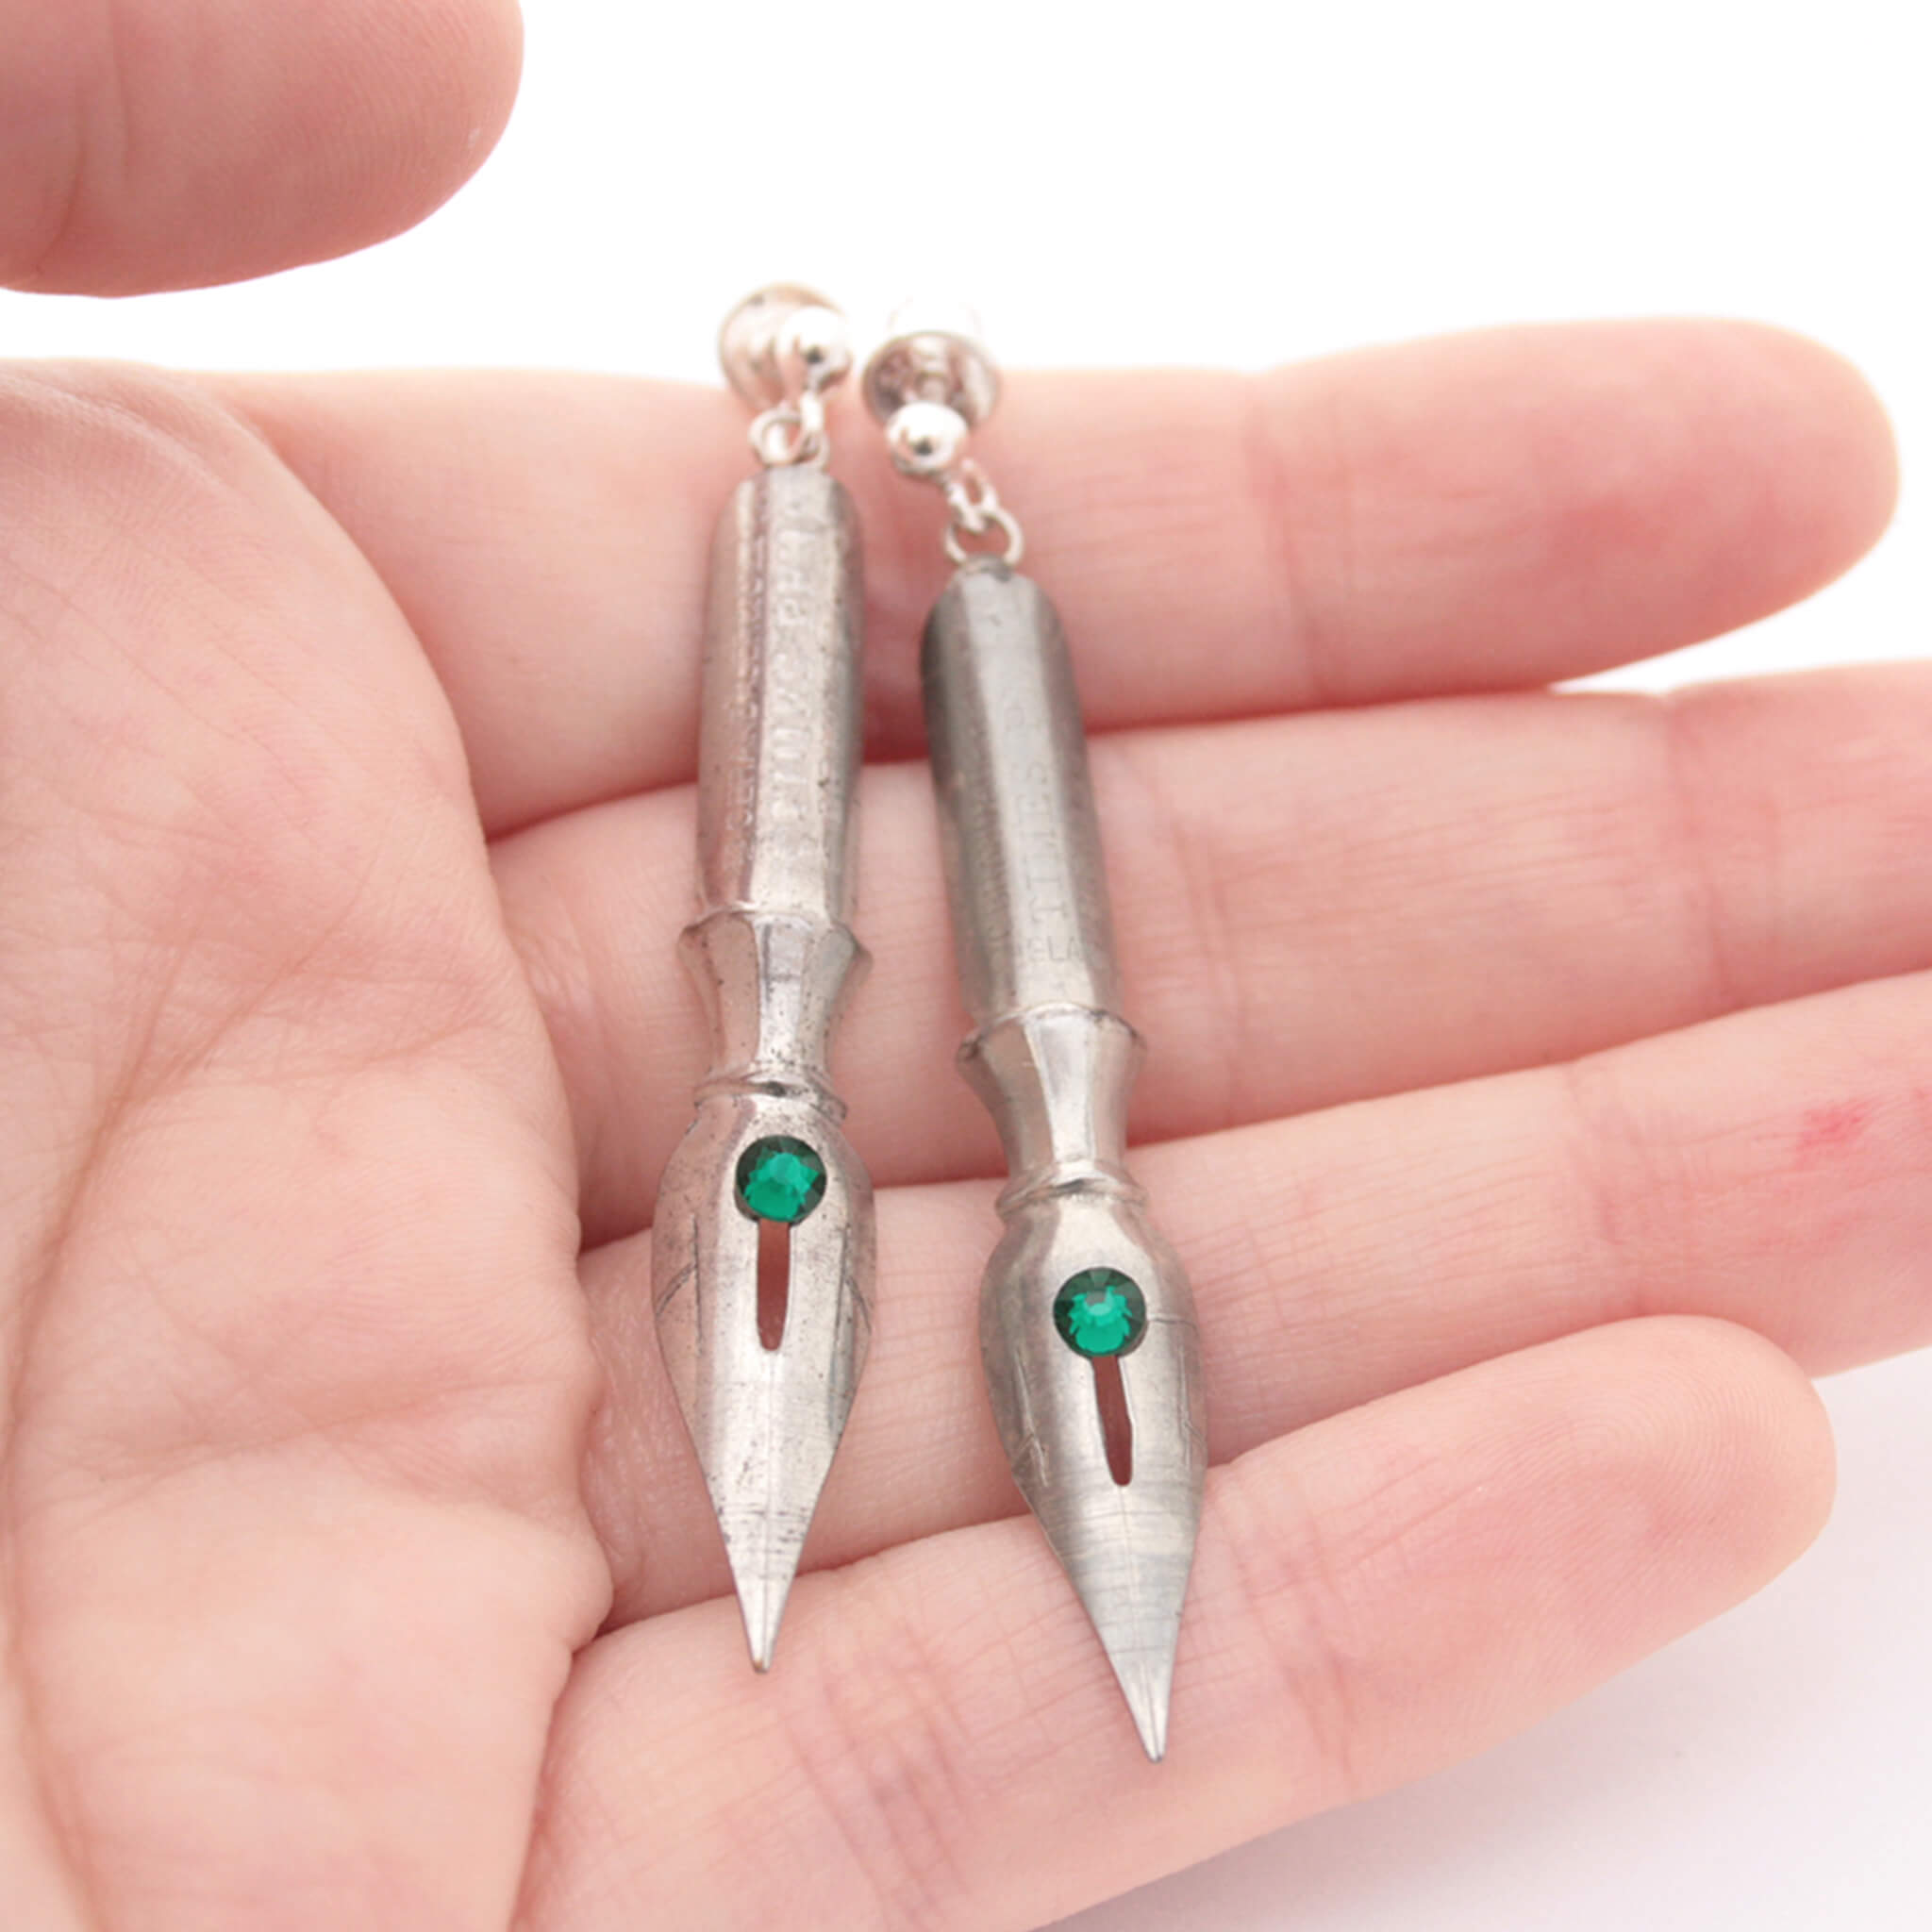 pen nib earrings with emerald birthstone crystals on them being hold in hand